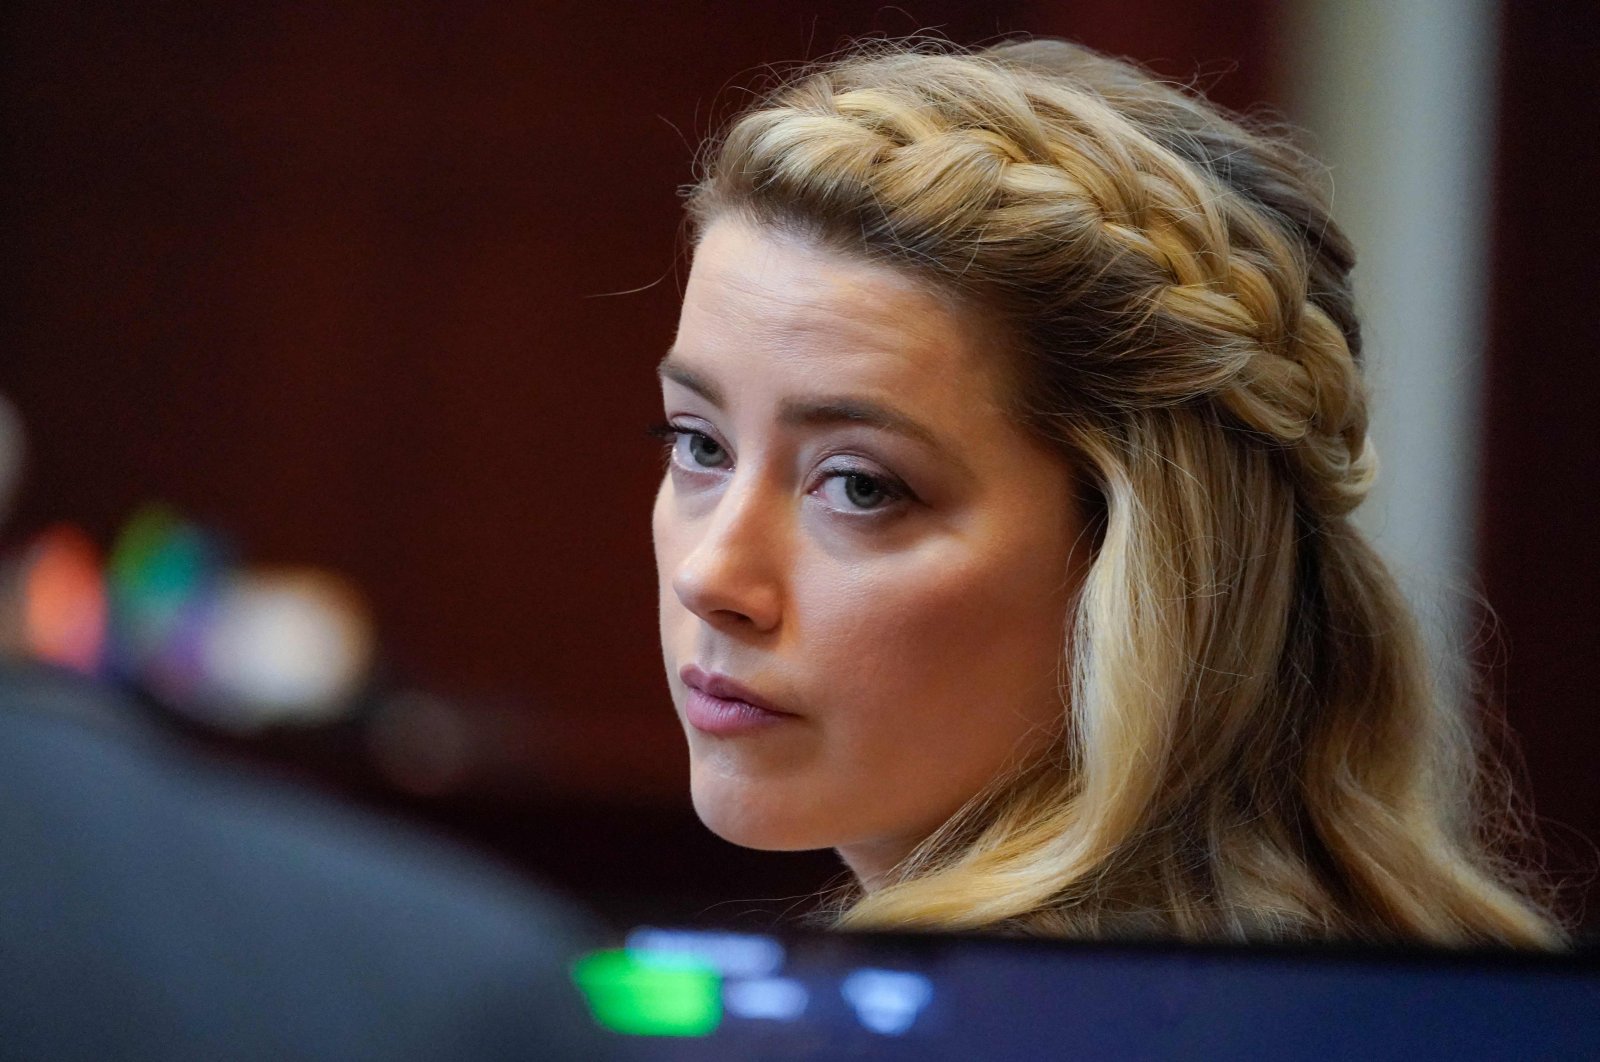 Amber Heard arrives for closing arguments in the Depp v. Heard trial at the Fairfax County Circuit Courthouse in Fairfax, Virginia, U.S., May 27, 2022. (AFP Photo)